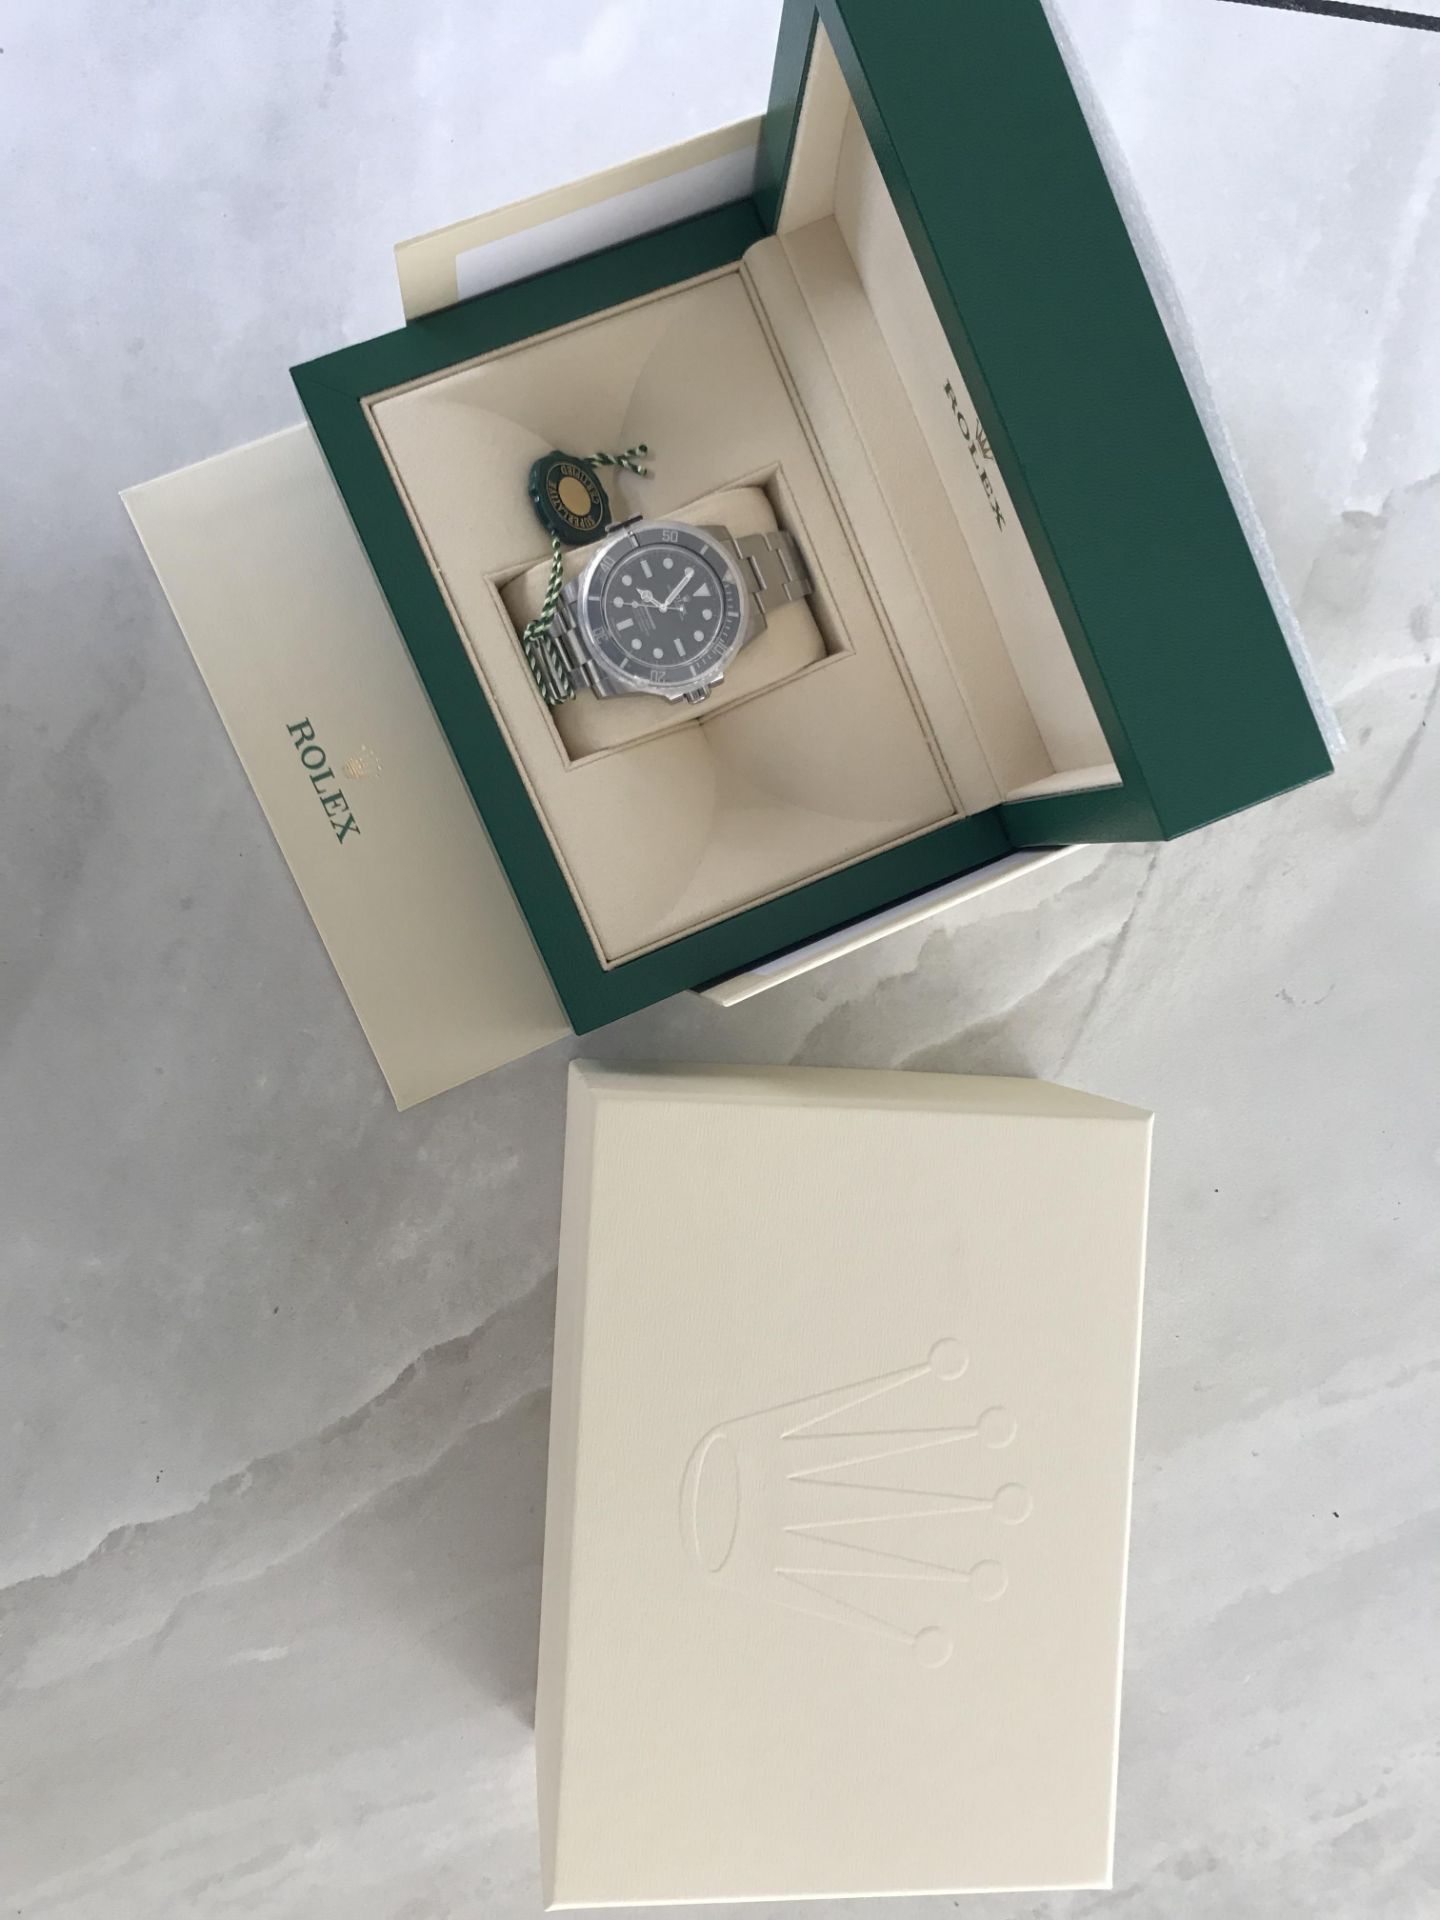 2020 ROLEX SUBMARINER OYSTER STEEL 40 MM WATCH 114060 - Image 10 of 15